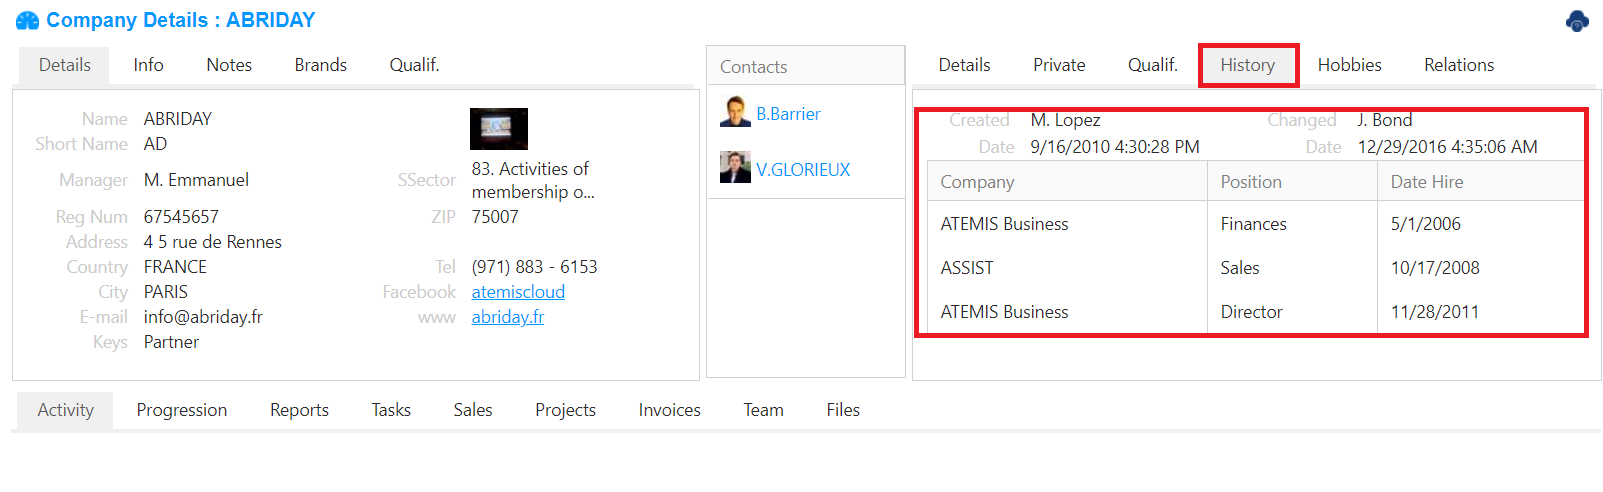 1.CRM &gt; History : This tab shows the history of the individual in the company. It will allow you to see the individual job, position and companies he was linked to in the past.